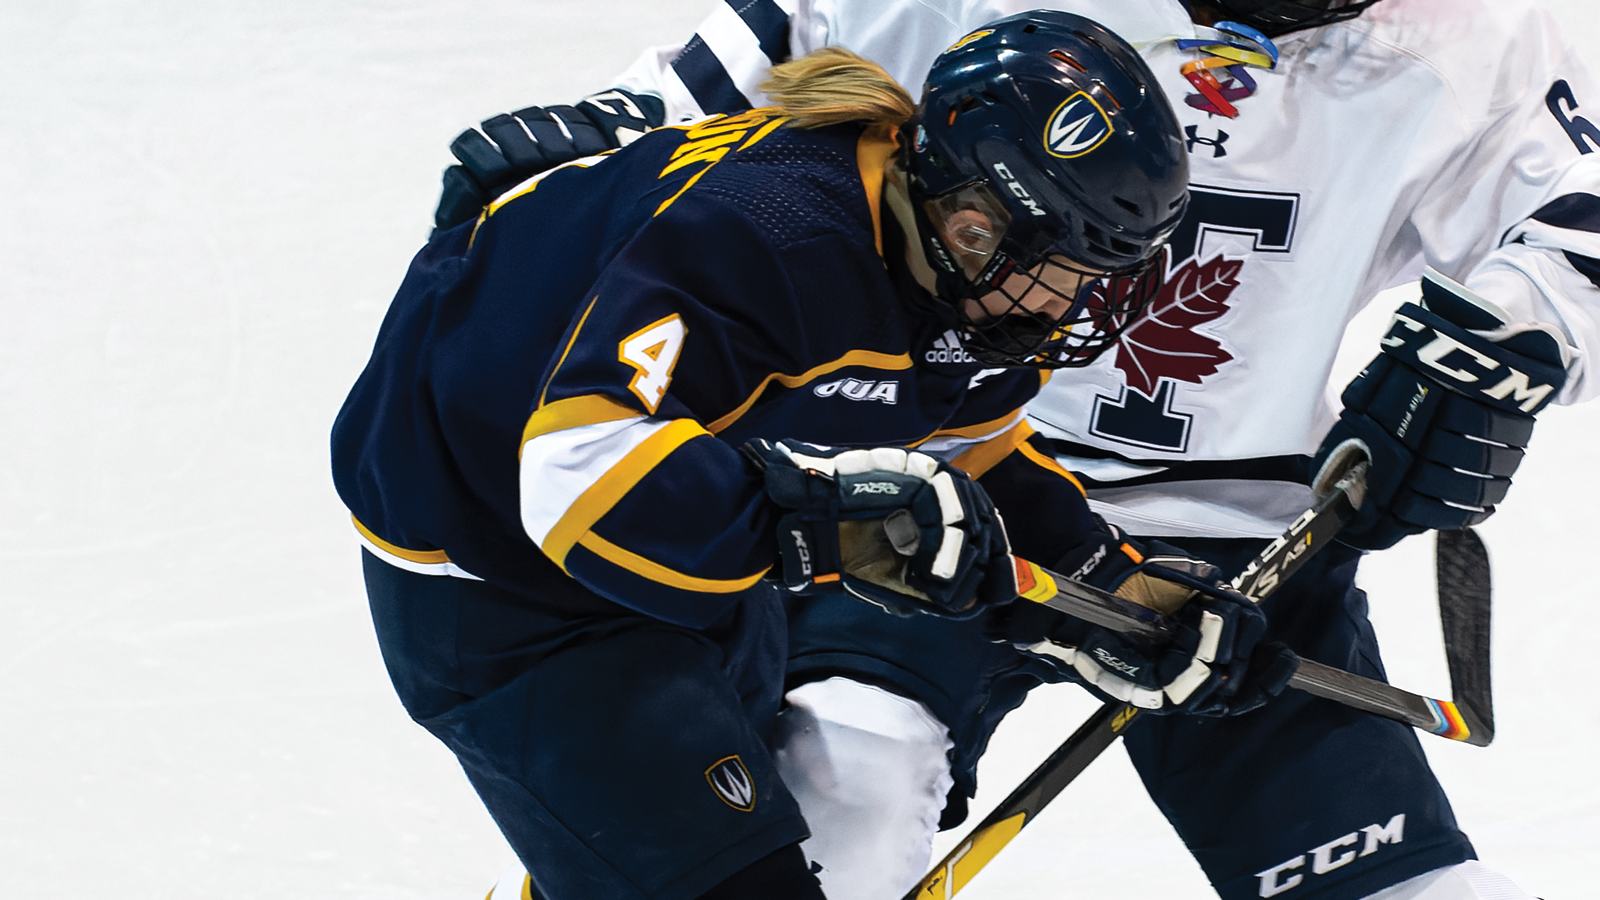 Windsor women's hockey player Jessica Gribbon battling for the puck against an opponent on the ice